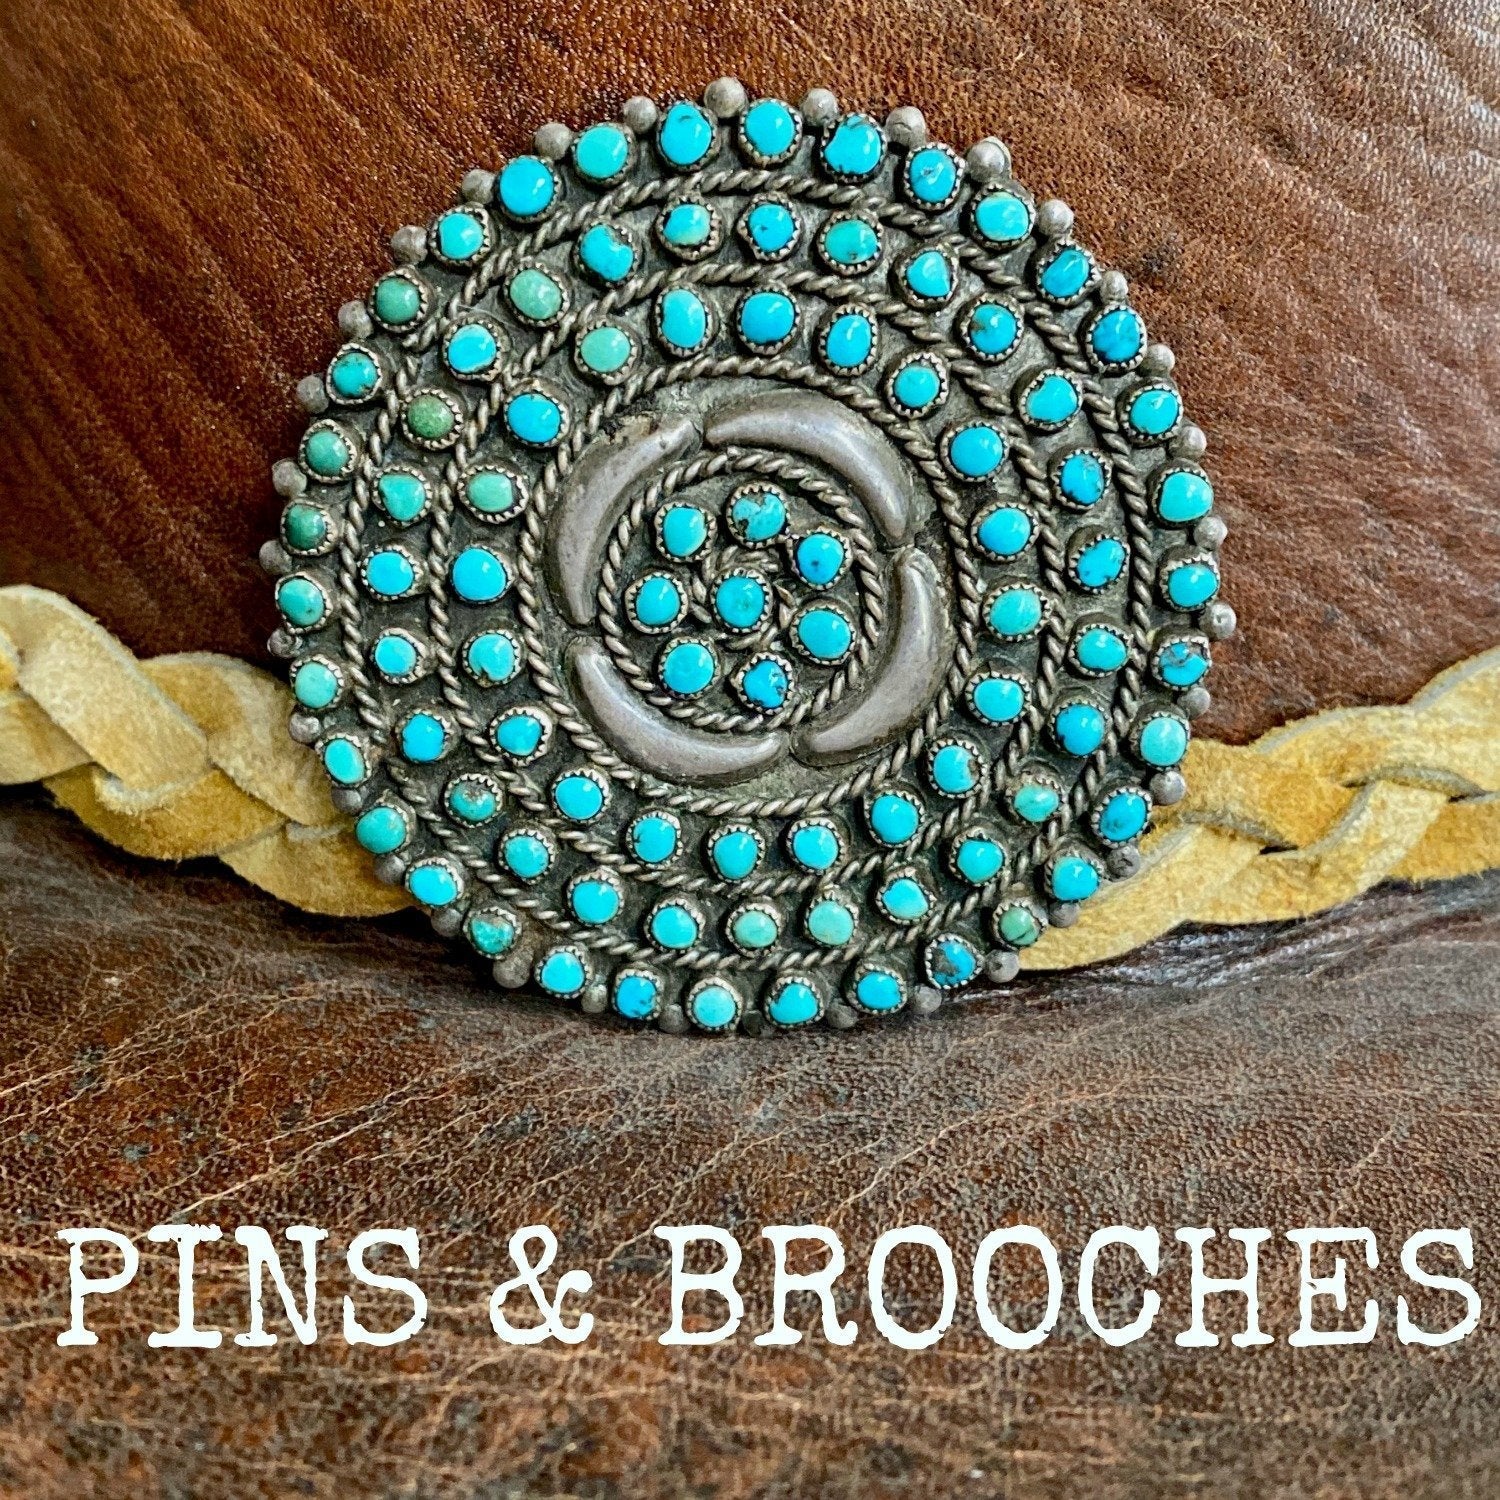 Pins & Brooches Yourgreatfinds